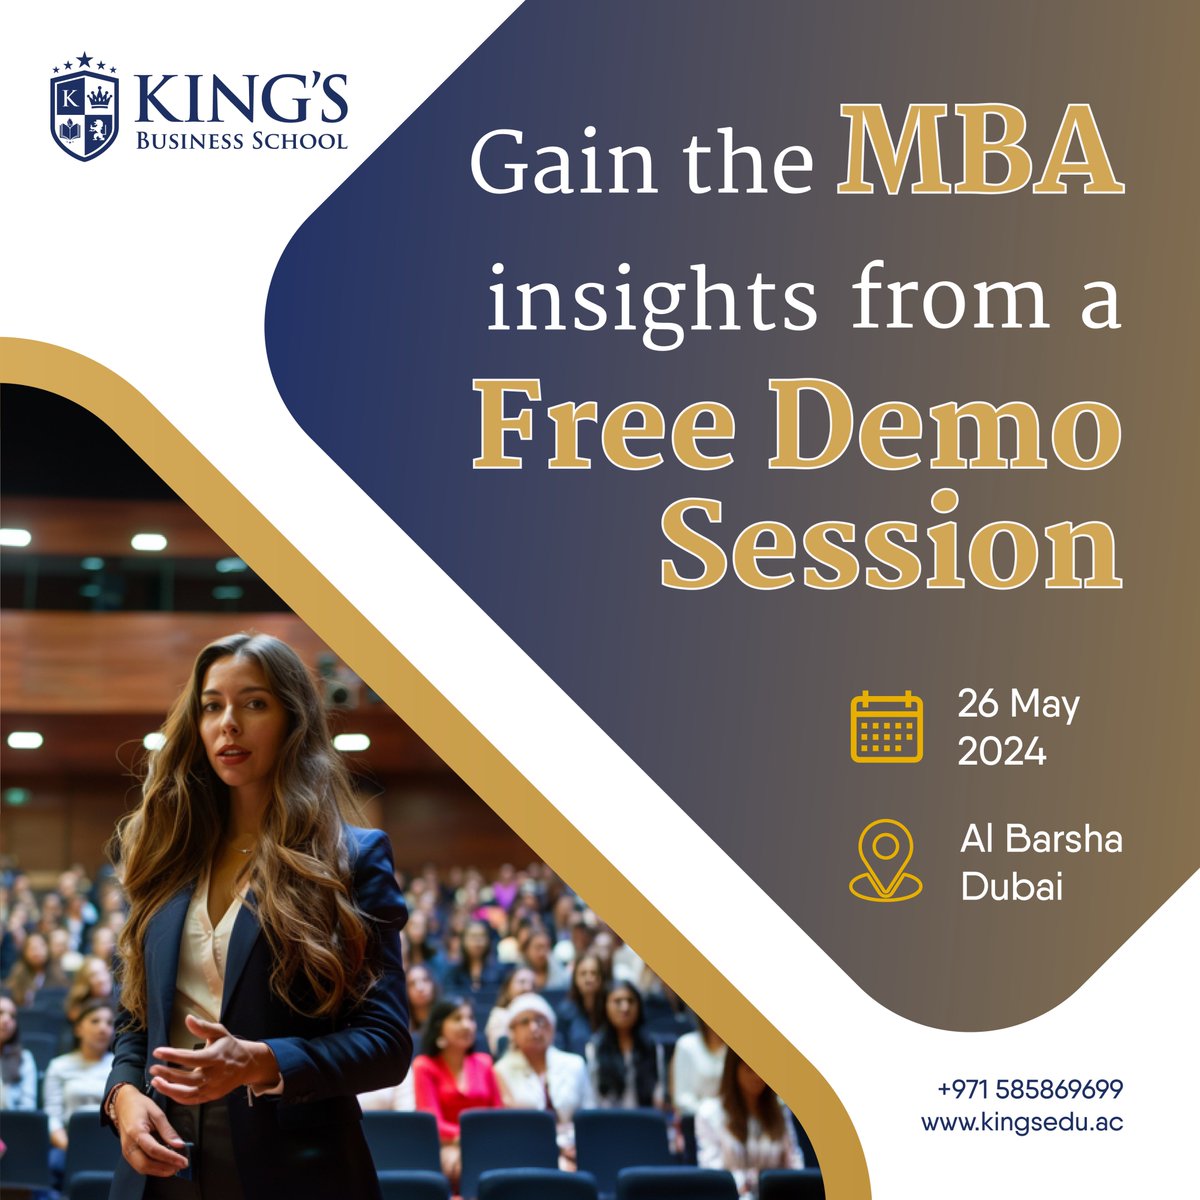 Start your professional advancement and personal growth by attending our exclusive Free #MBA Demo Session in Dubai. 
.
.

#MBAProgram #FreeMBADemo #kingsbusinessschool #KingsBSchool